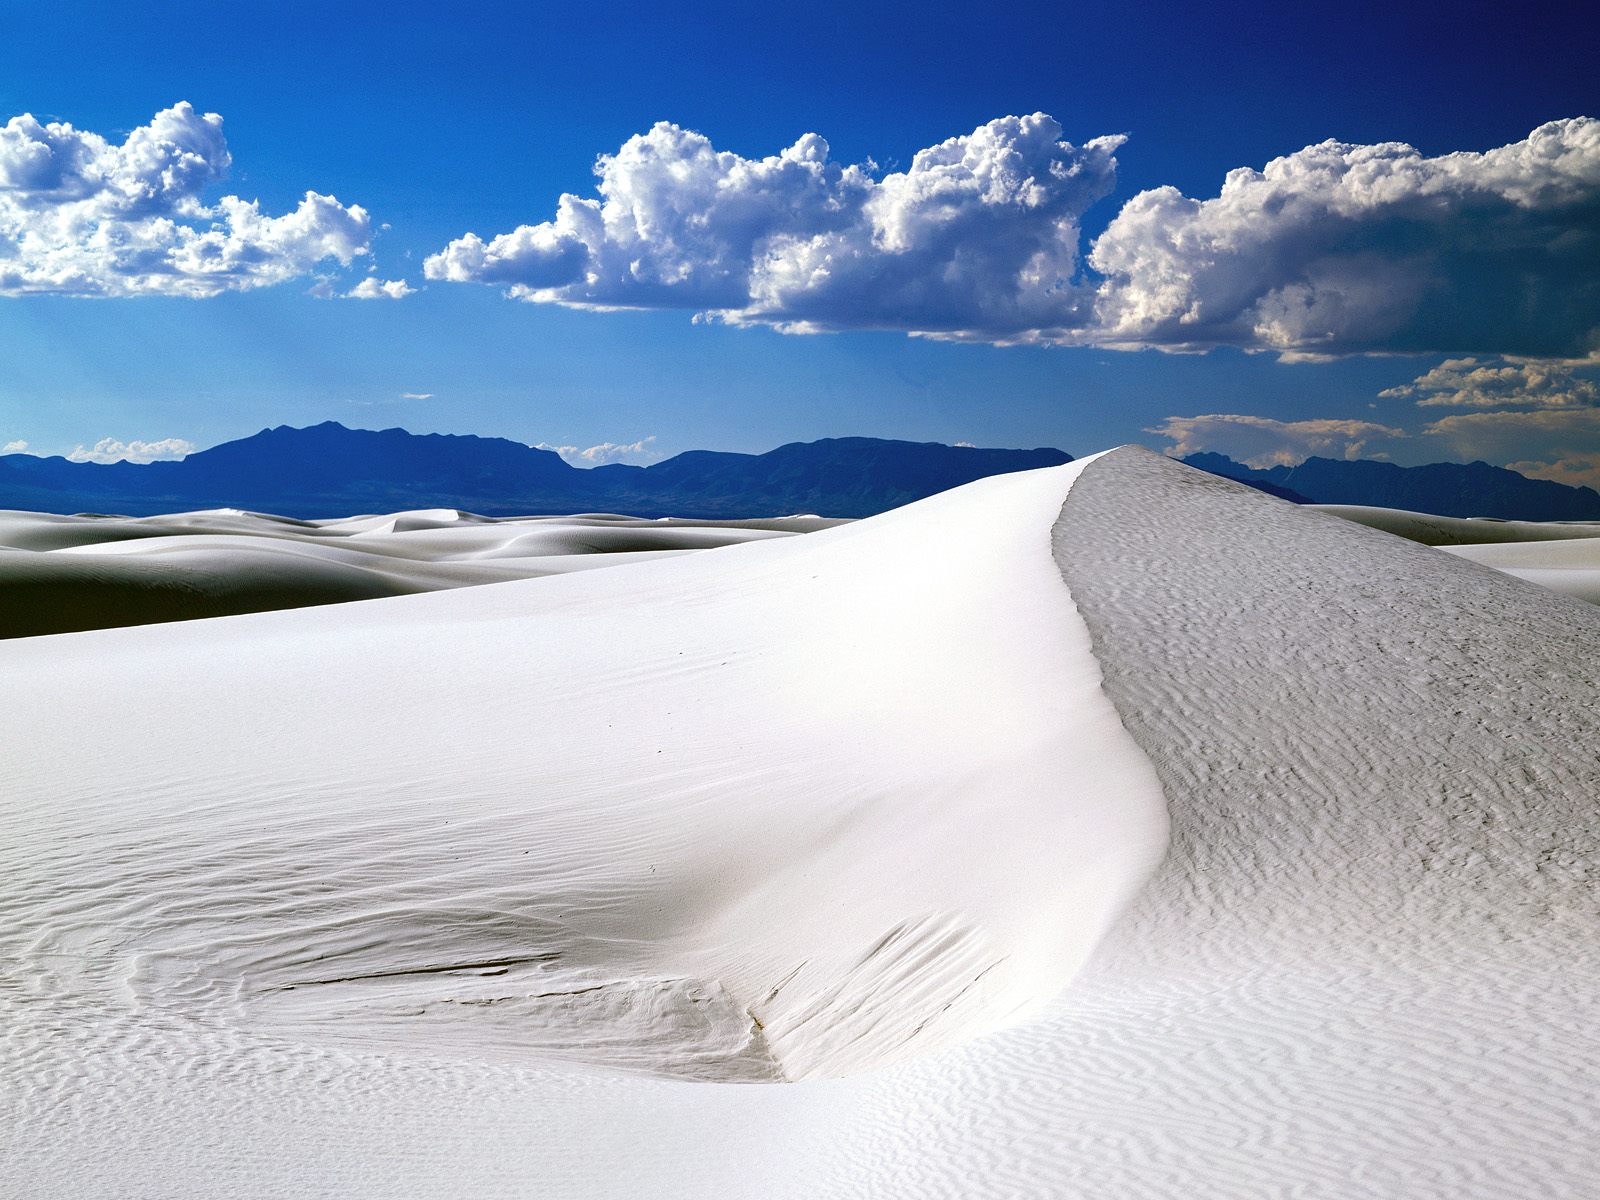 Download HQ White Sands National Monument, New Mexico Deserts wallpaper / 1600x1200